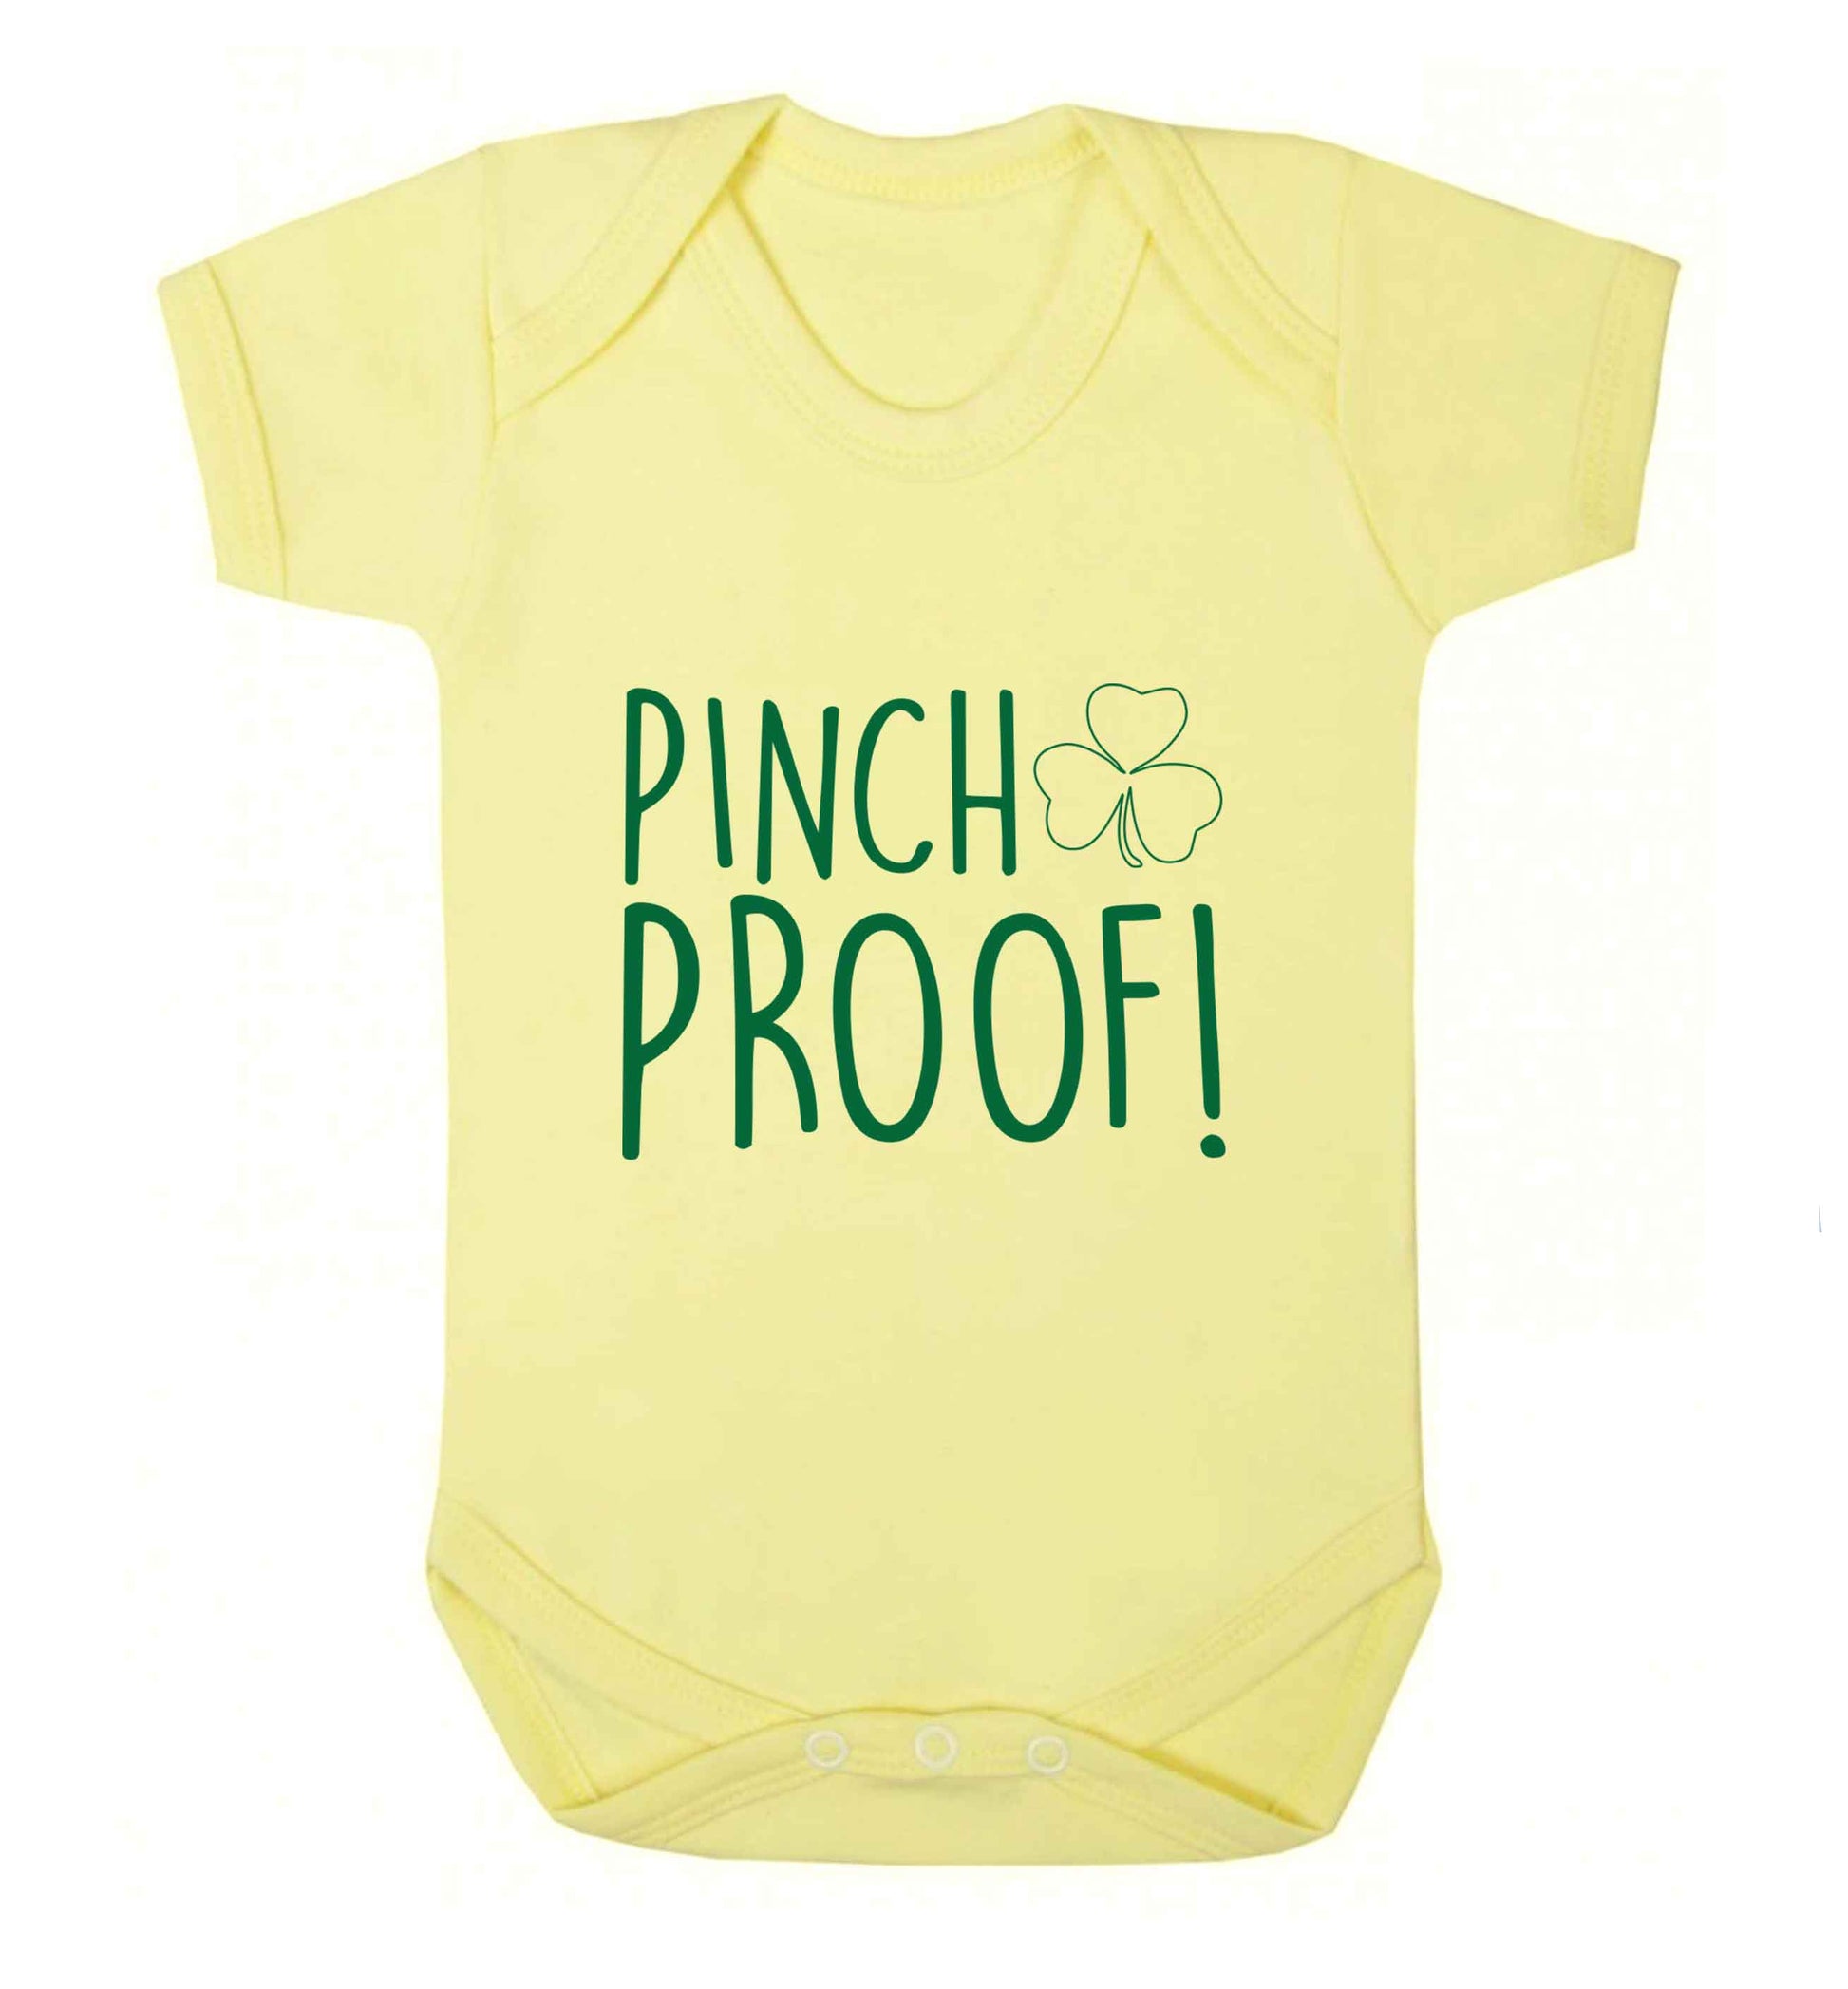 Pinch Proof baby vest pale yellow 18-24 months